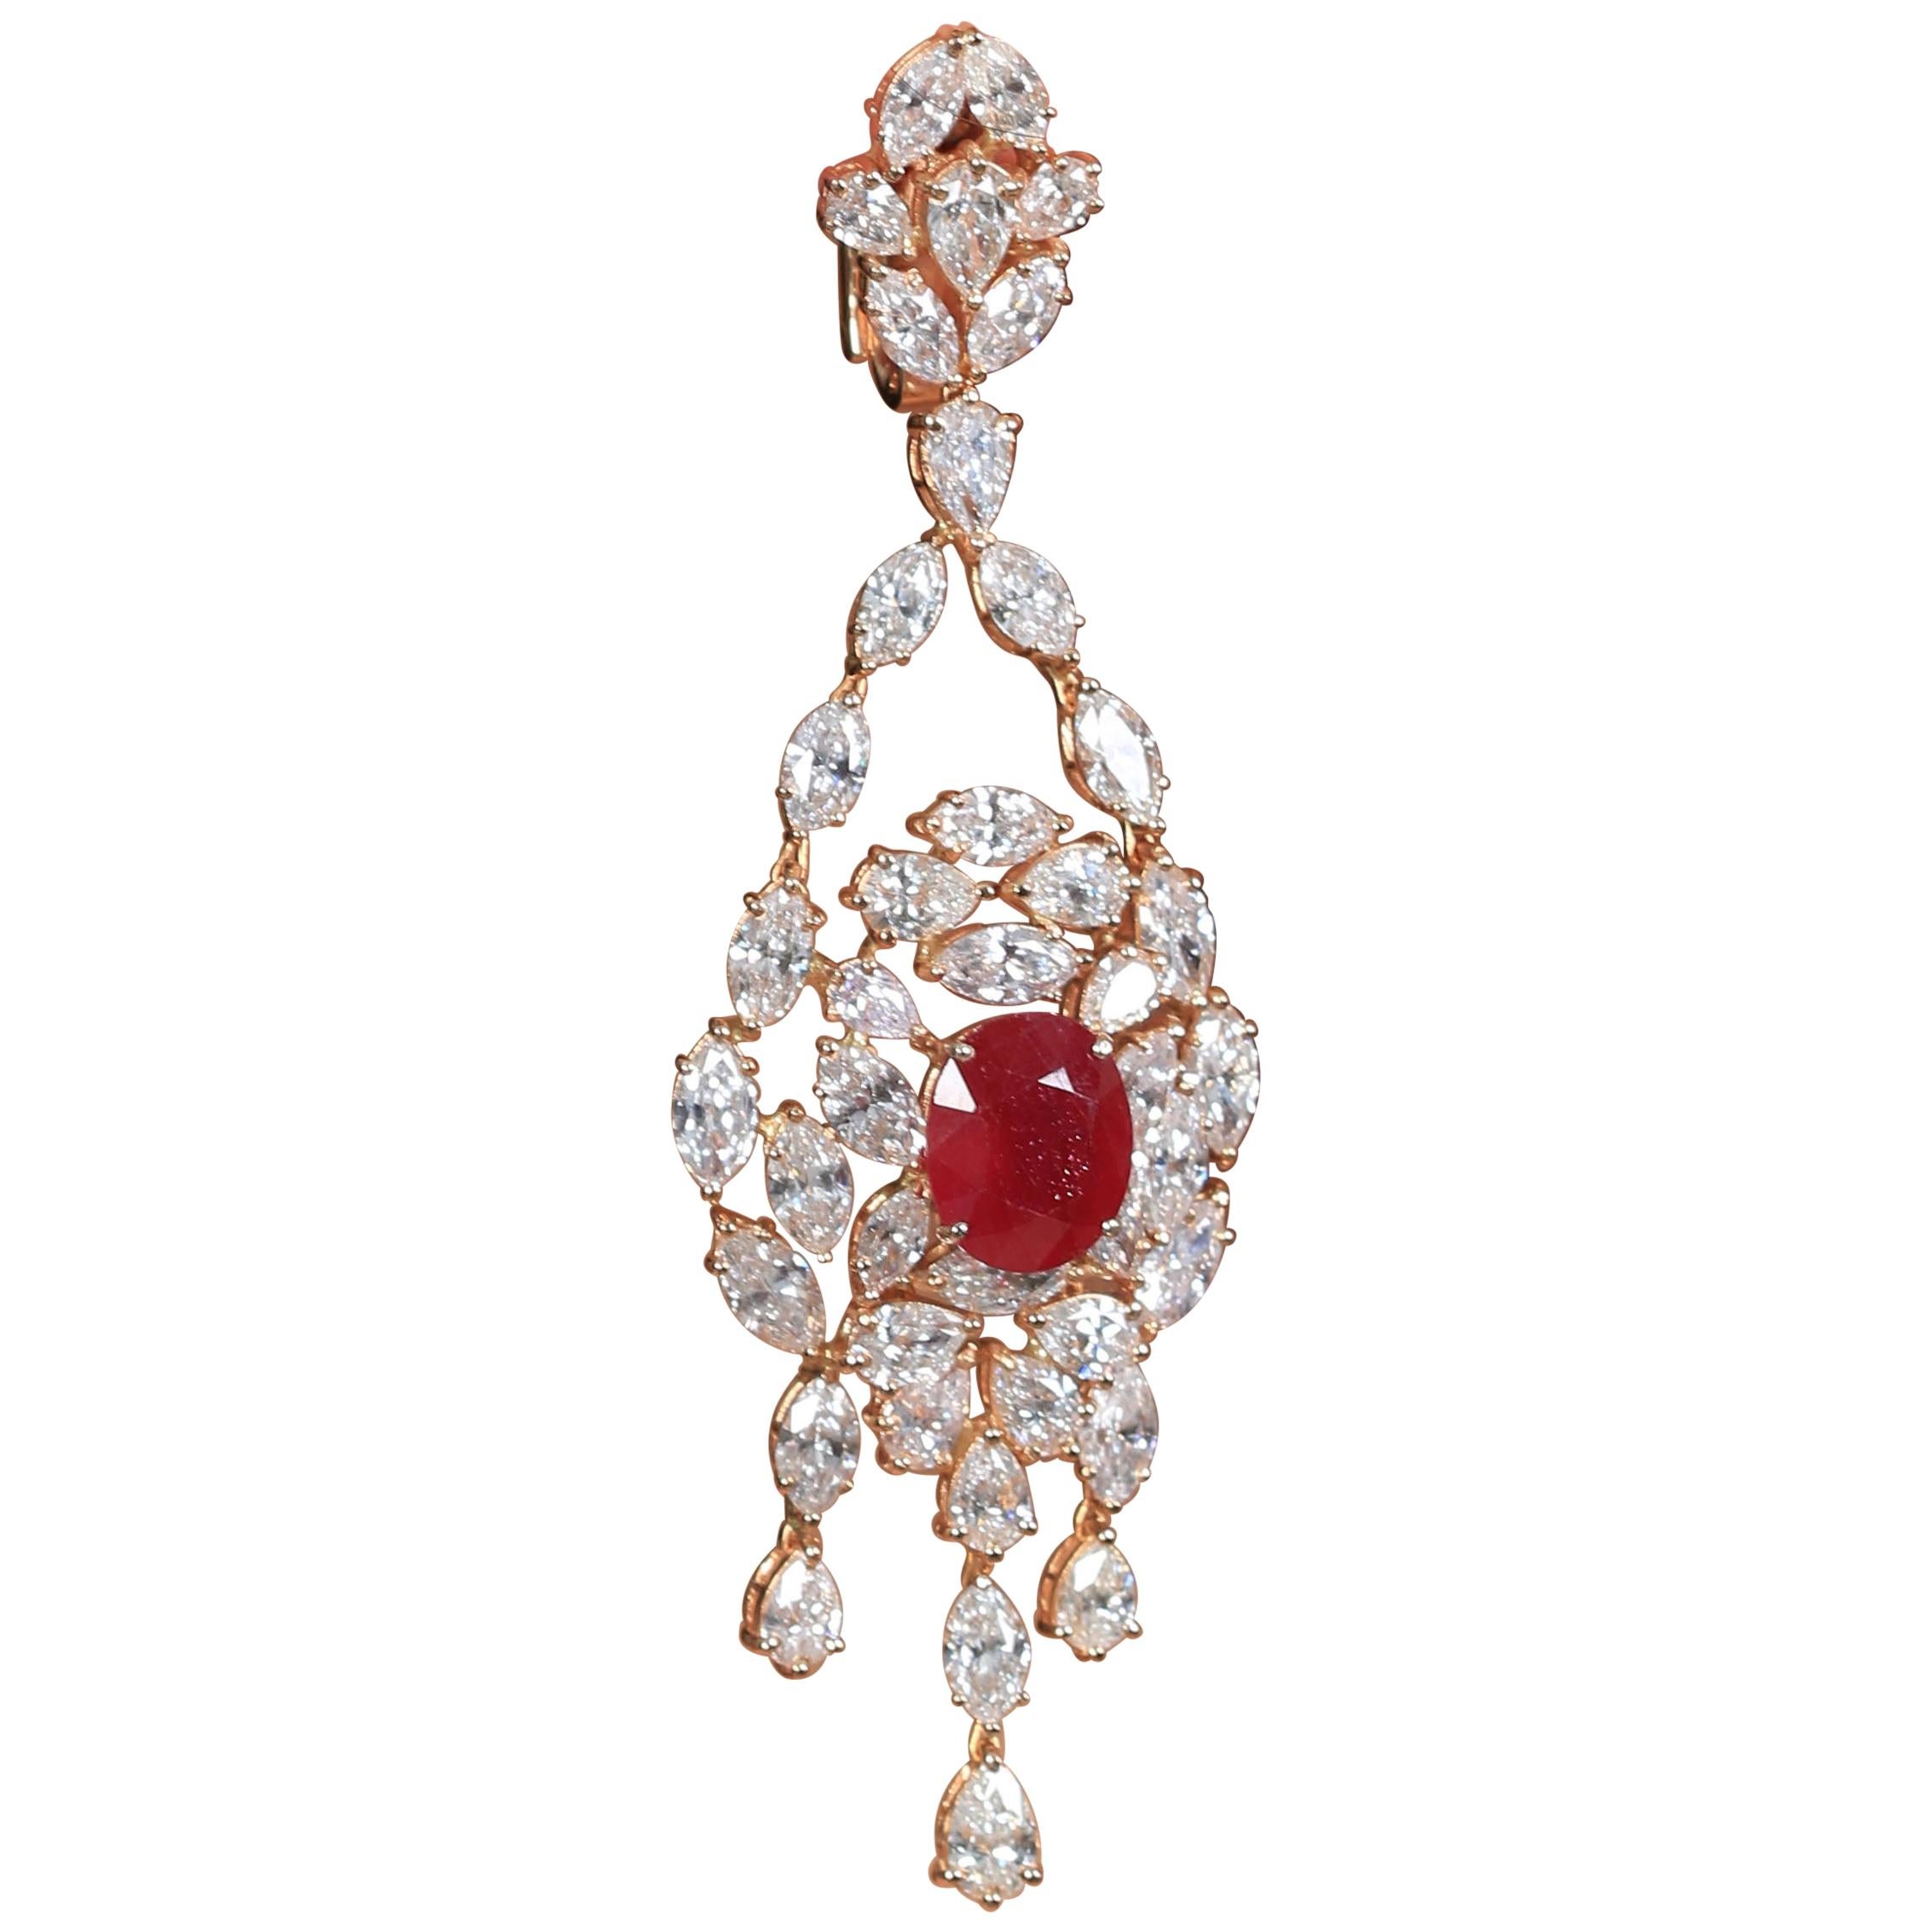 This rose gold earrings by Amwaj Jewelry presents an inspirational imperial design featuring 12.39 carat round African ruby surrounded by a medley of fine marquise and pear shaped diamonds.

Diamond Clarity: VS SI / G H COLOR
Diamonds (Total Carat